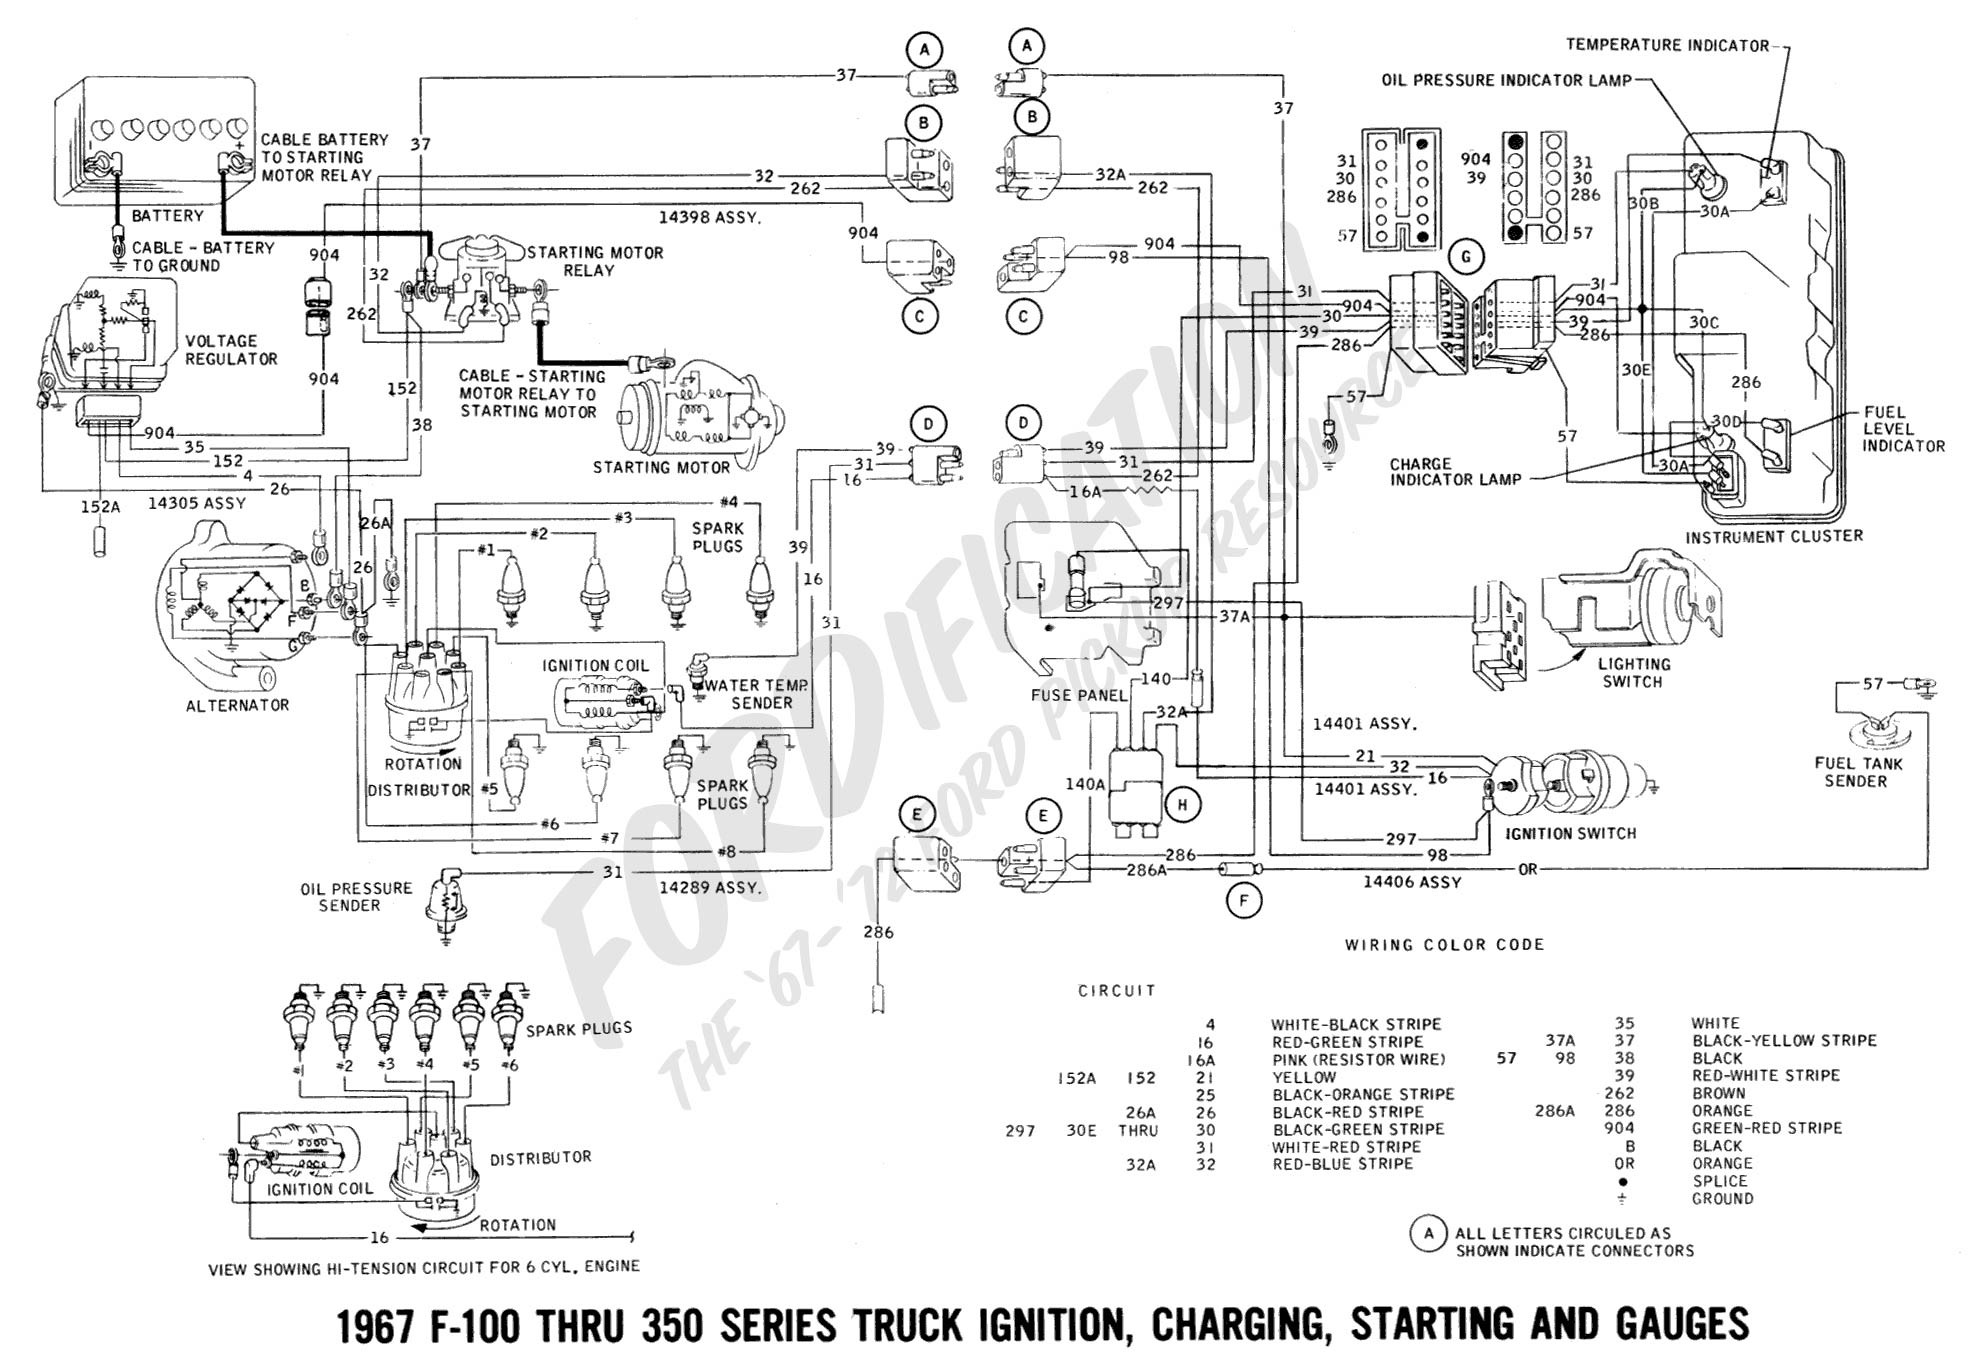 1969 Ford Thunderbird Fuse Box - Trusted Wiring Diagrams